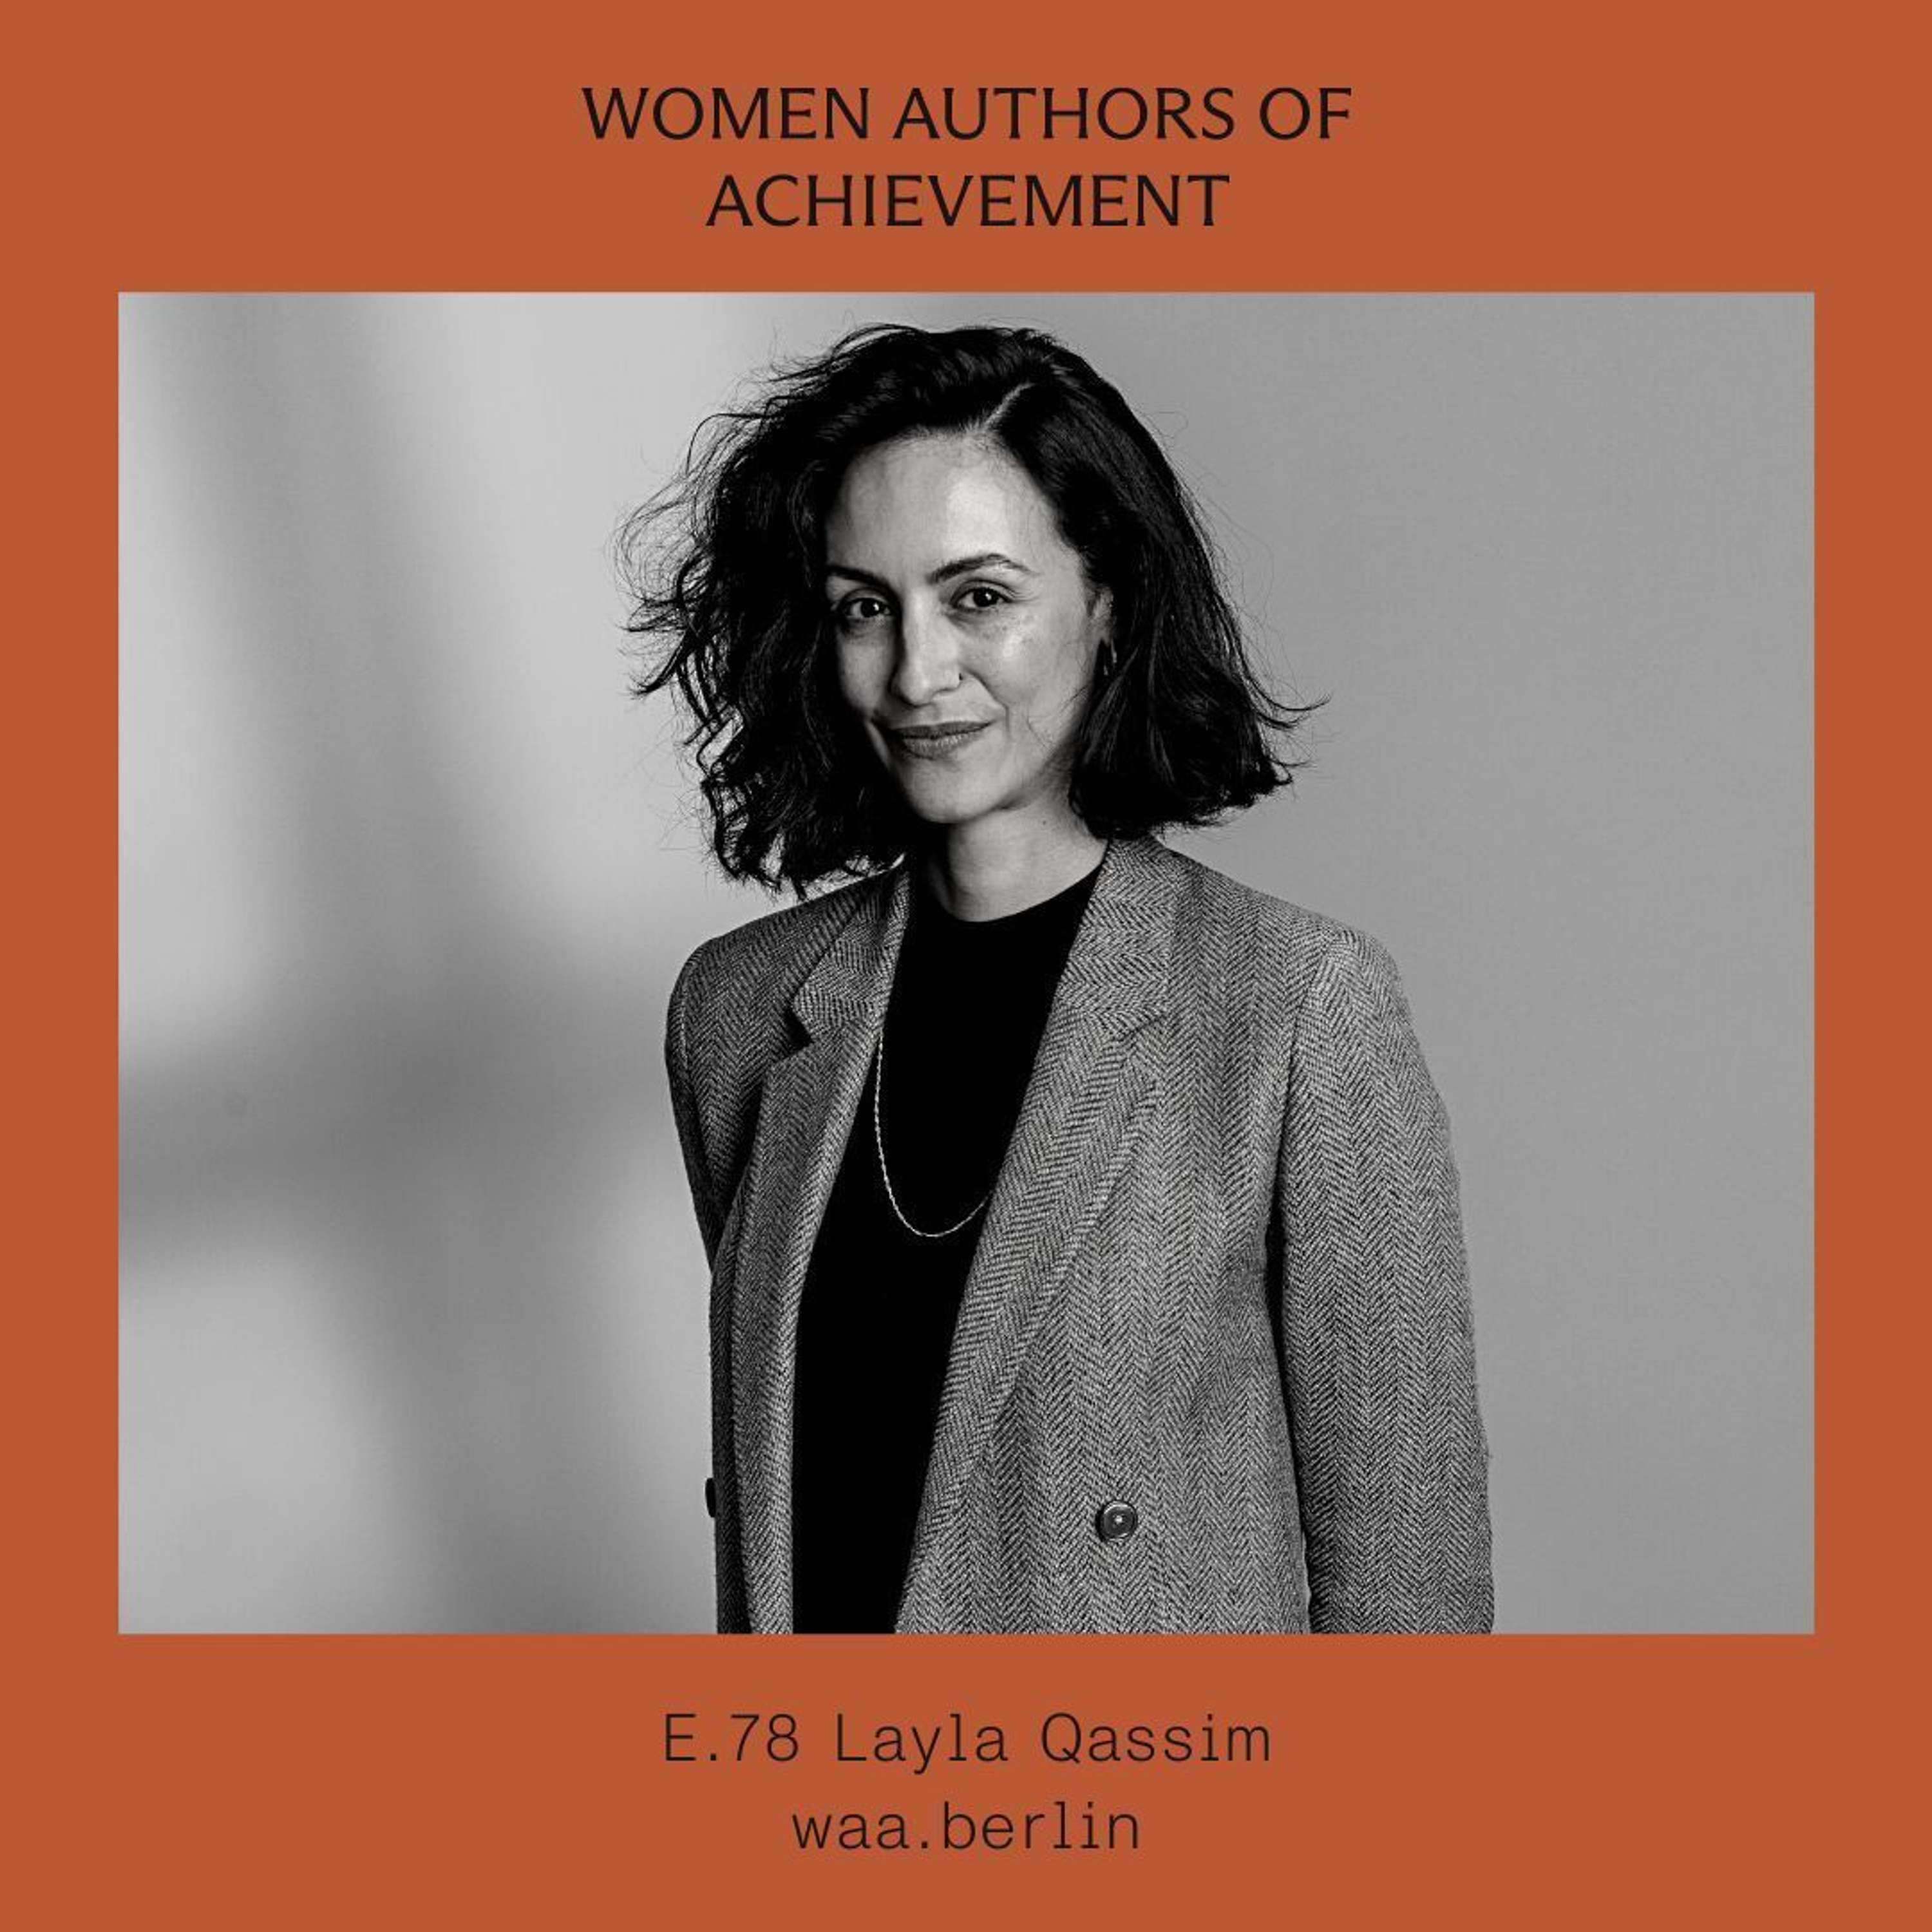 E.78 Moving up the ranks at Wall Street and redefining the essence of success with Layla Qassim